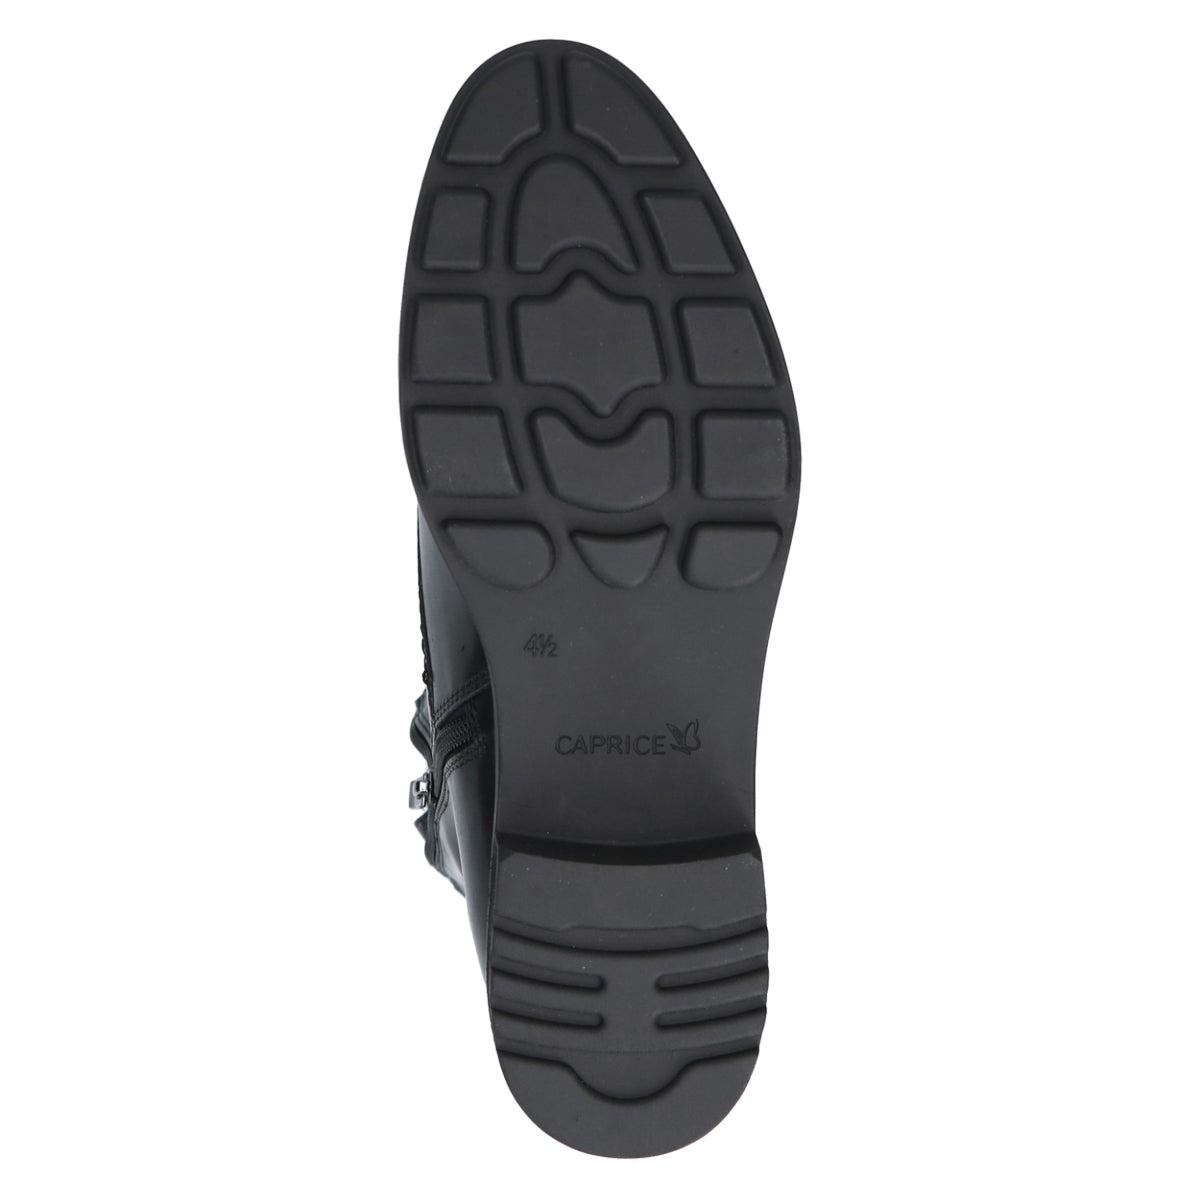 Image of the sturdy sole and heel of the Caprice Black Leather Boots.